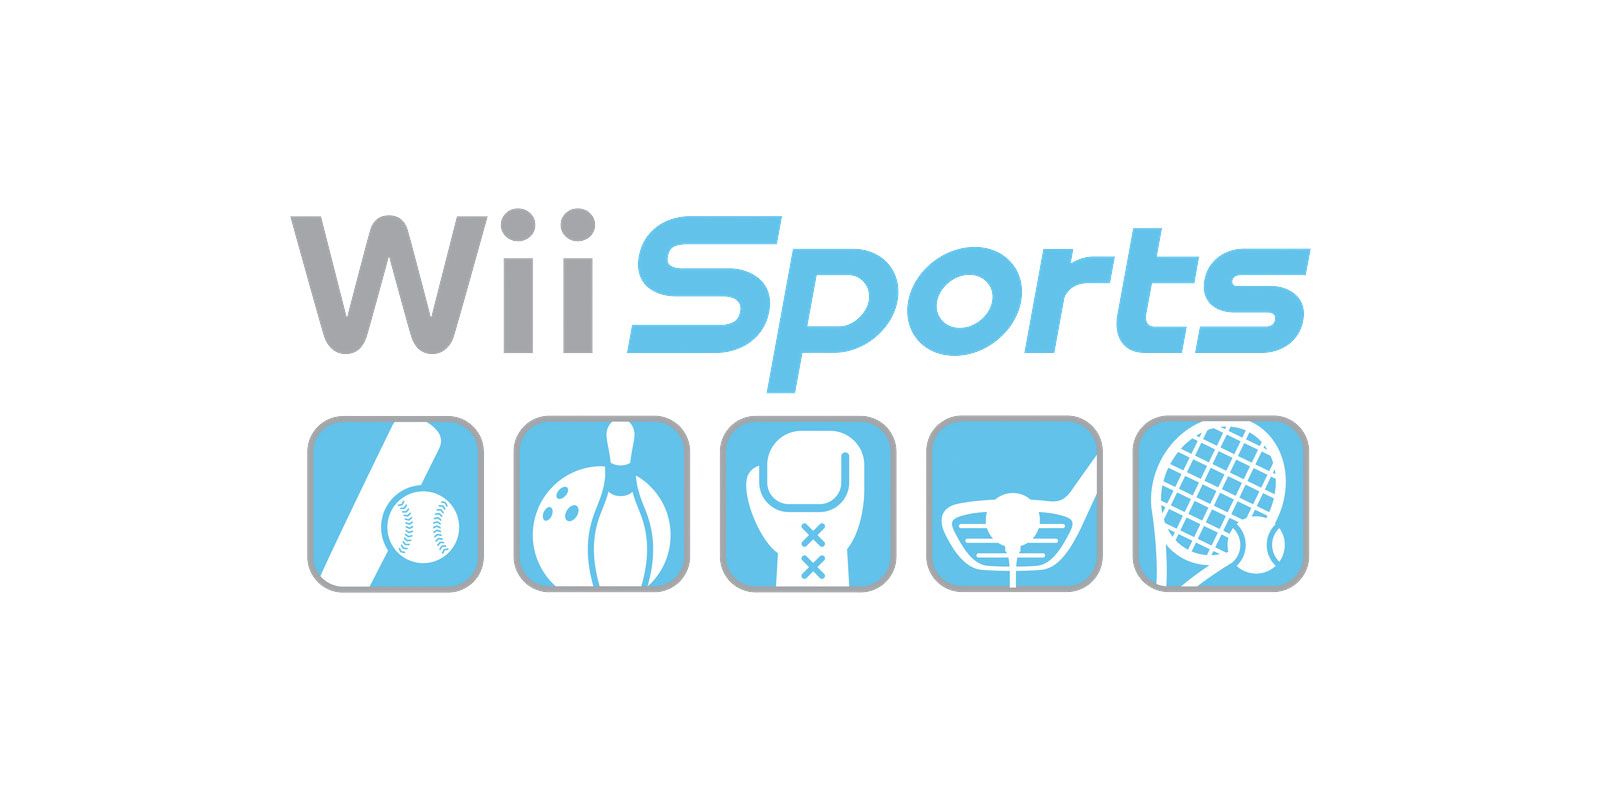 Nintendo Switch Sports does not have two games from Wii Sports